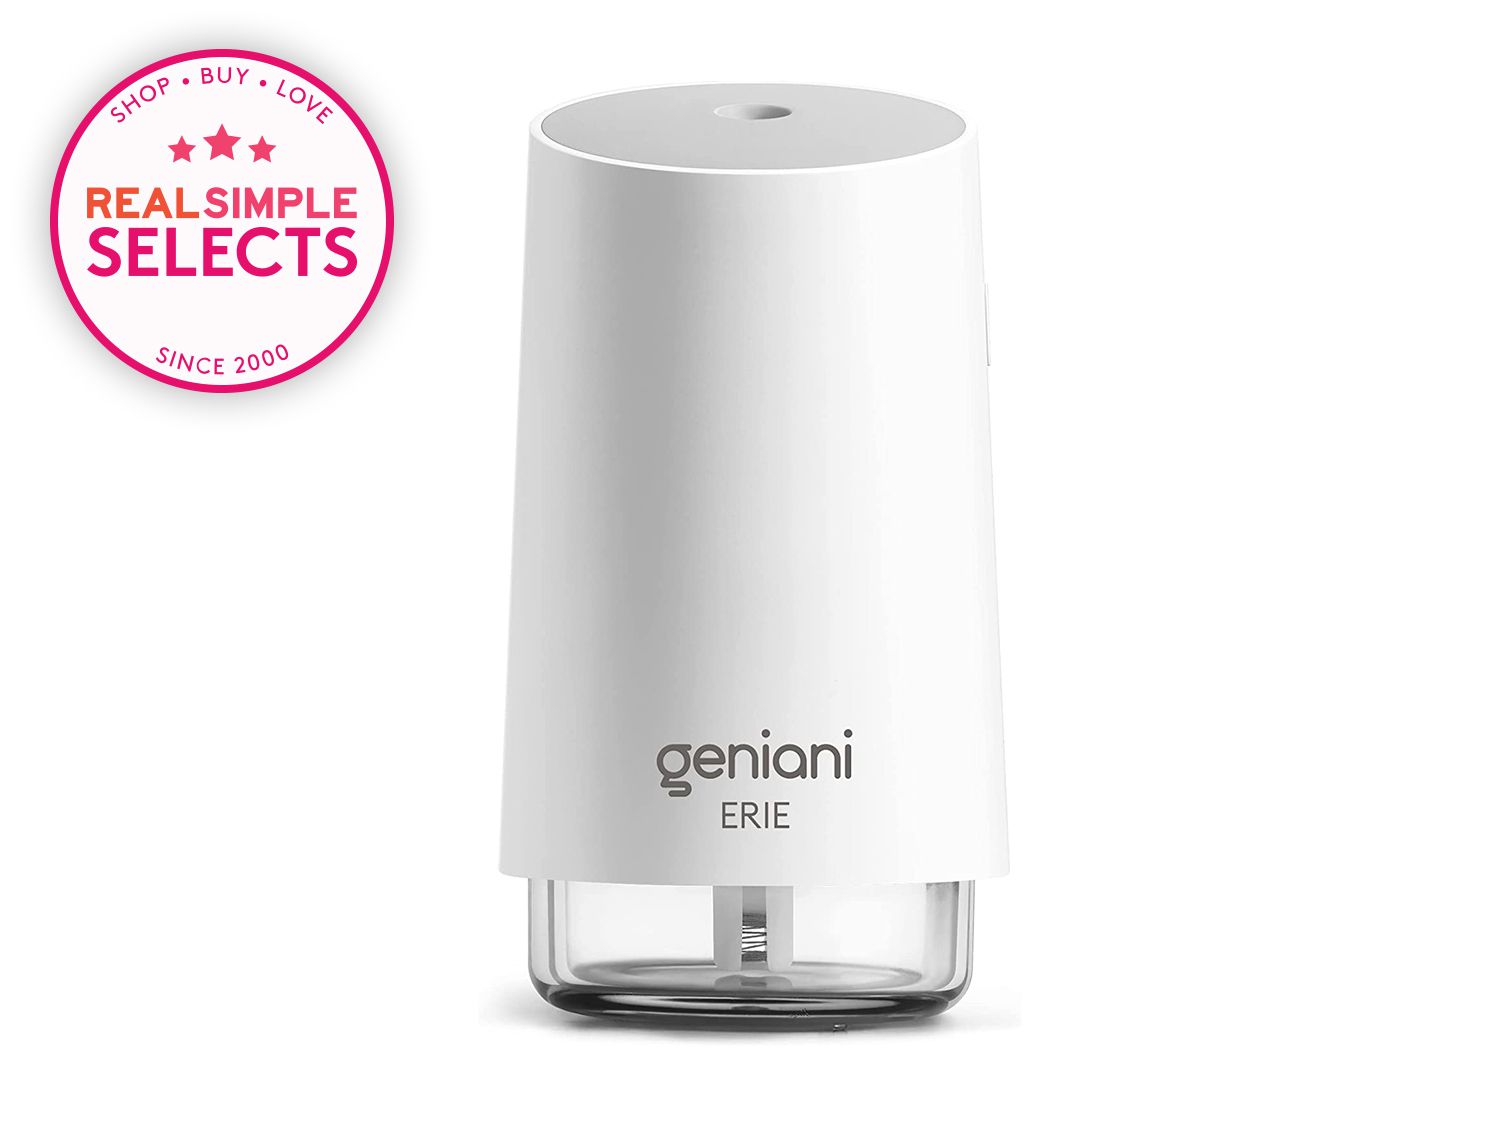 Geniani Erie Portable Small Cool Mist Humidifier